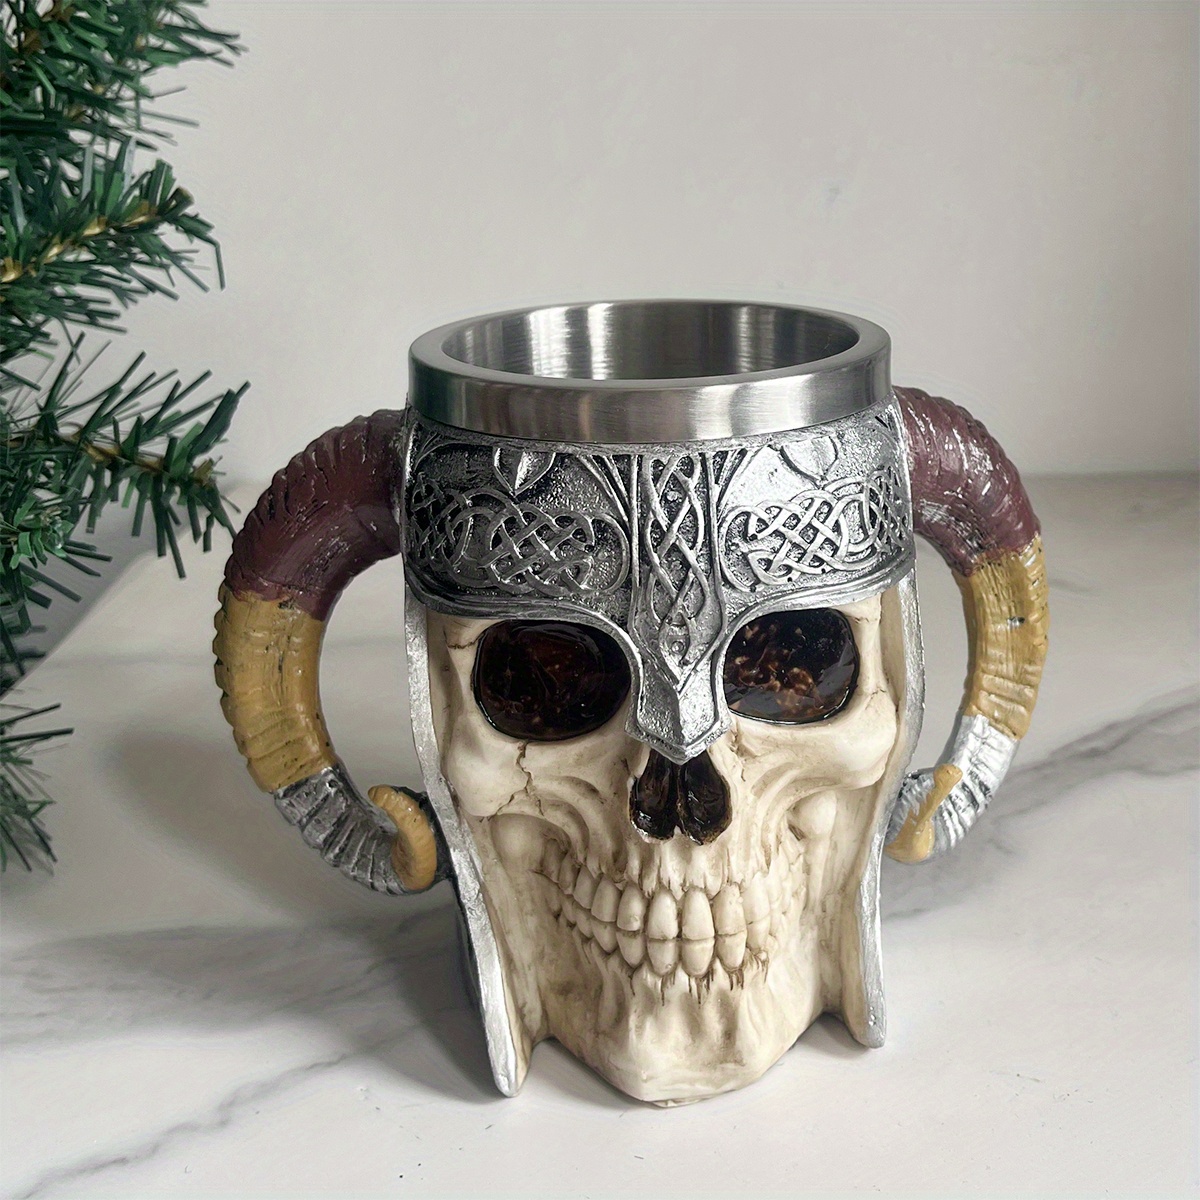 1pc Stainless Steel Skull Warrior Beer Coffee Mug Beverage Drinking Cup  Best Gift For Birthday Men Woman Halloween Party Cup Day Of The Dead Gifts